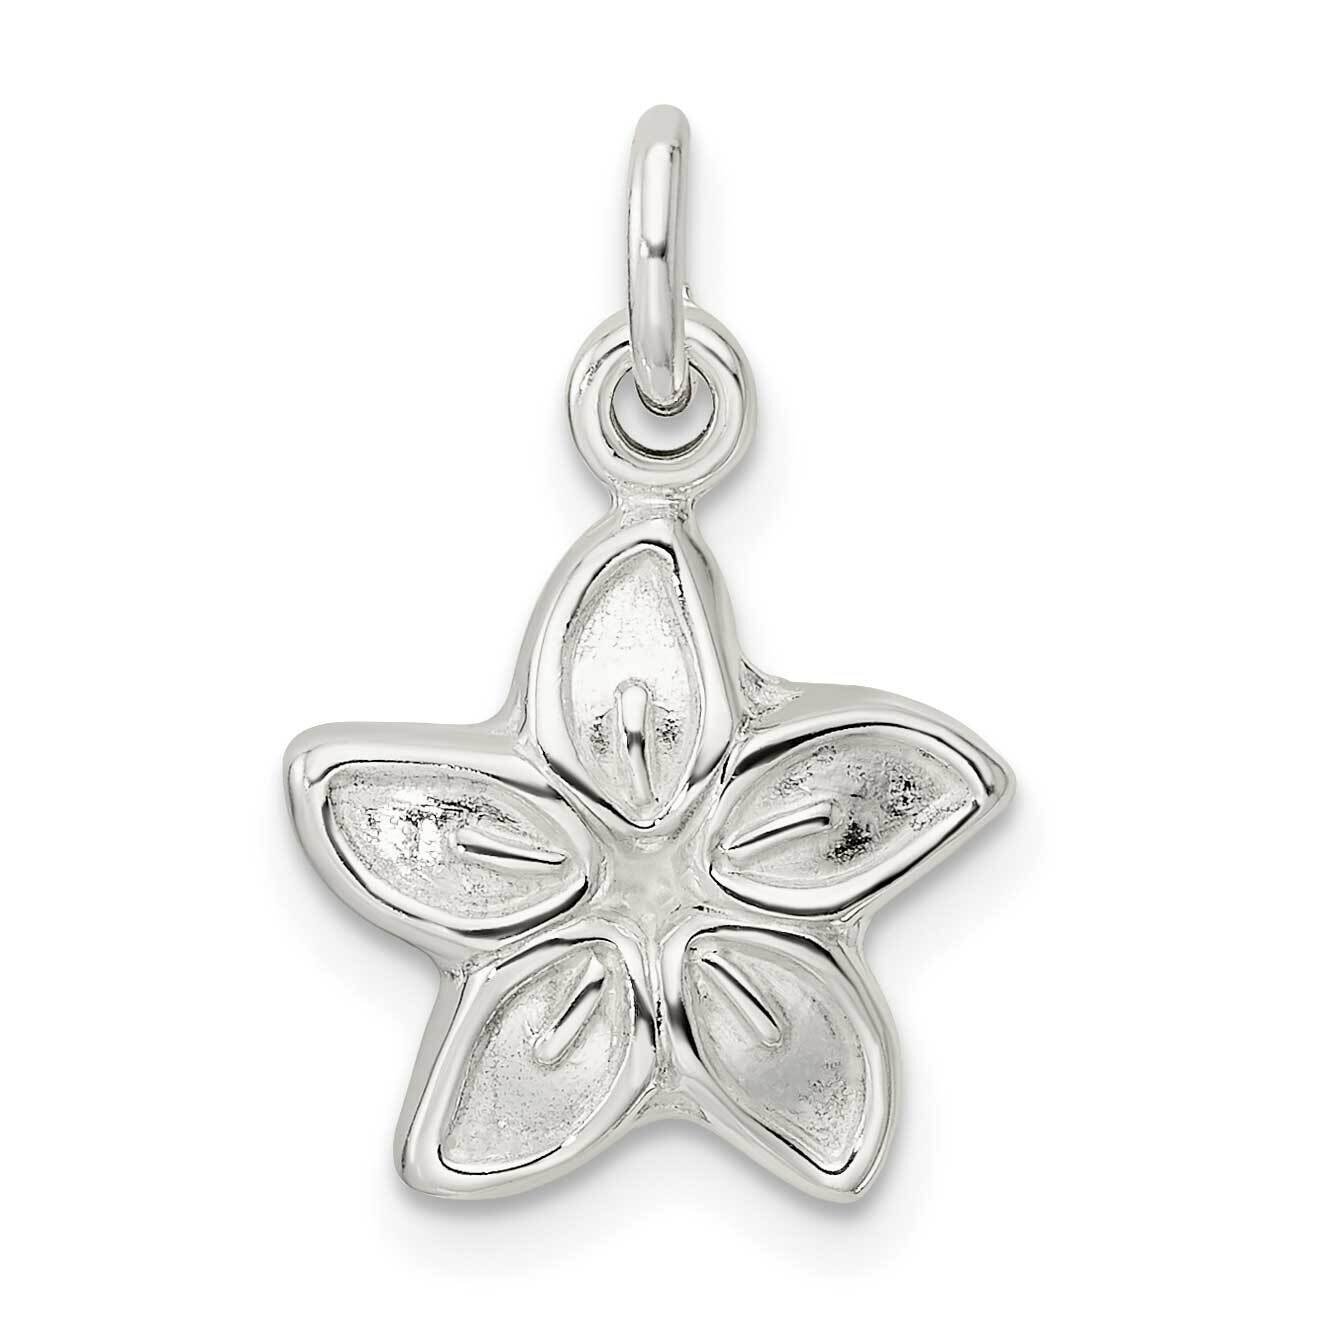 Puffed Flower Charm Sterling Silver QC11025